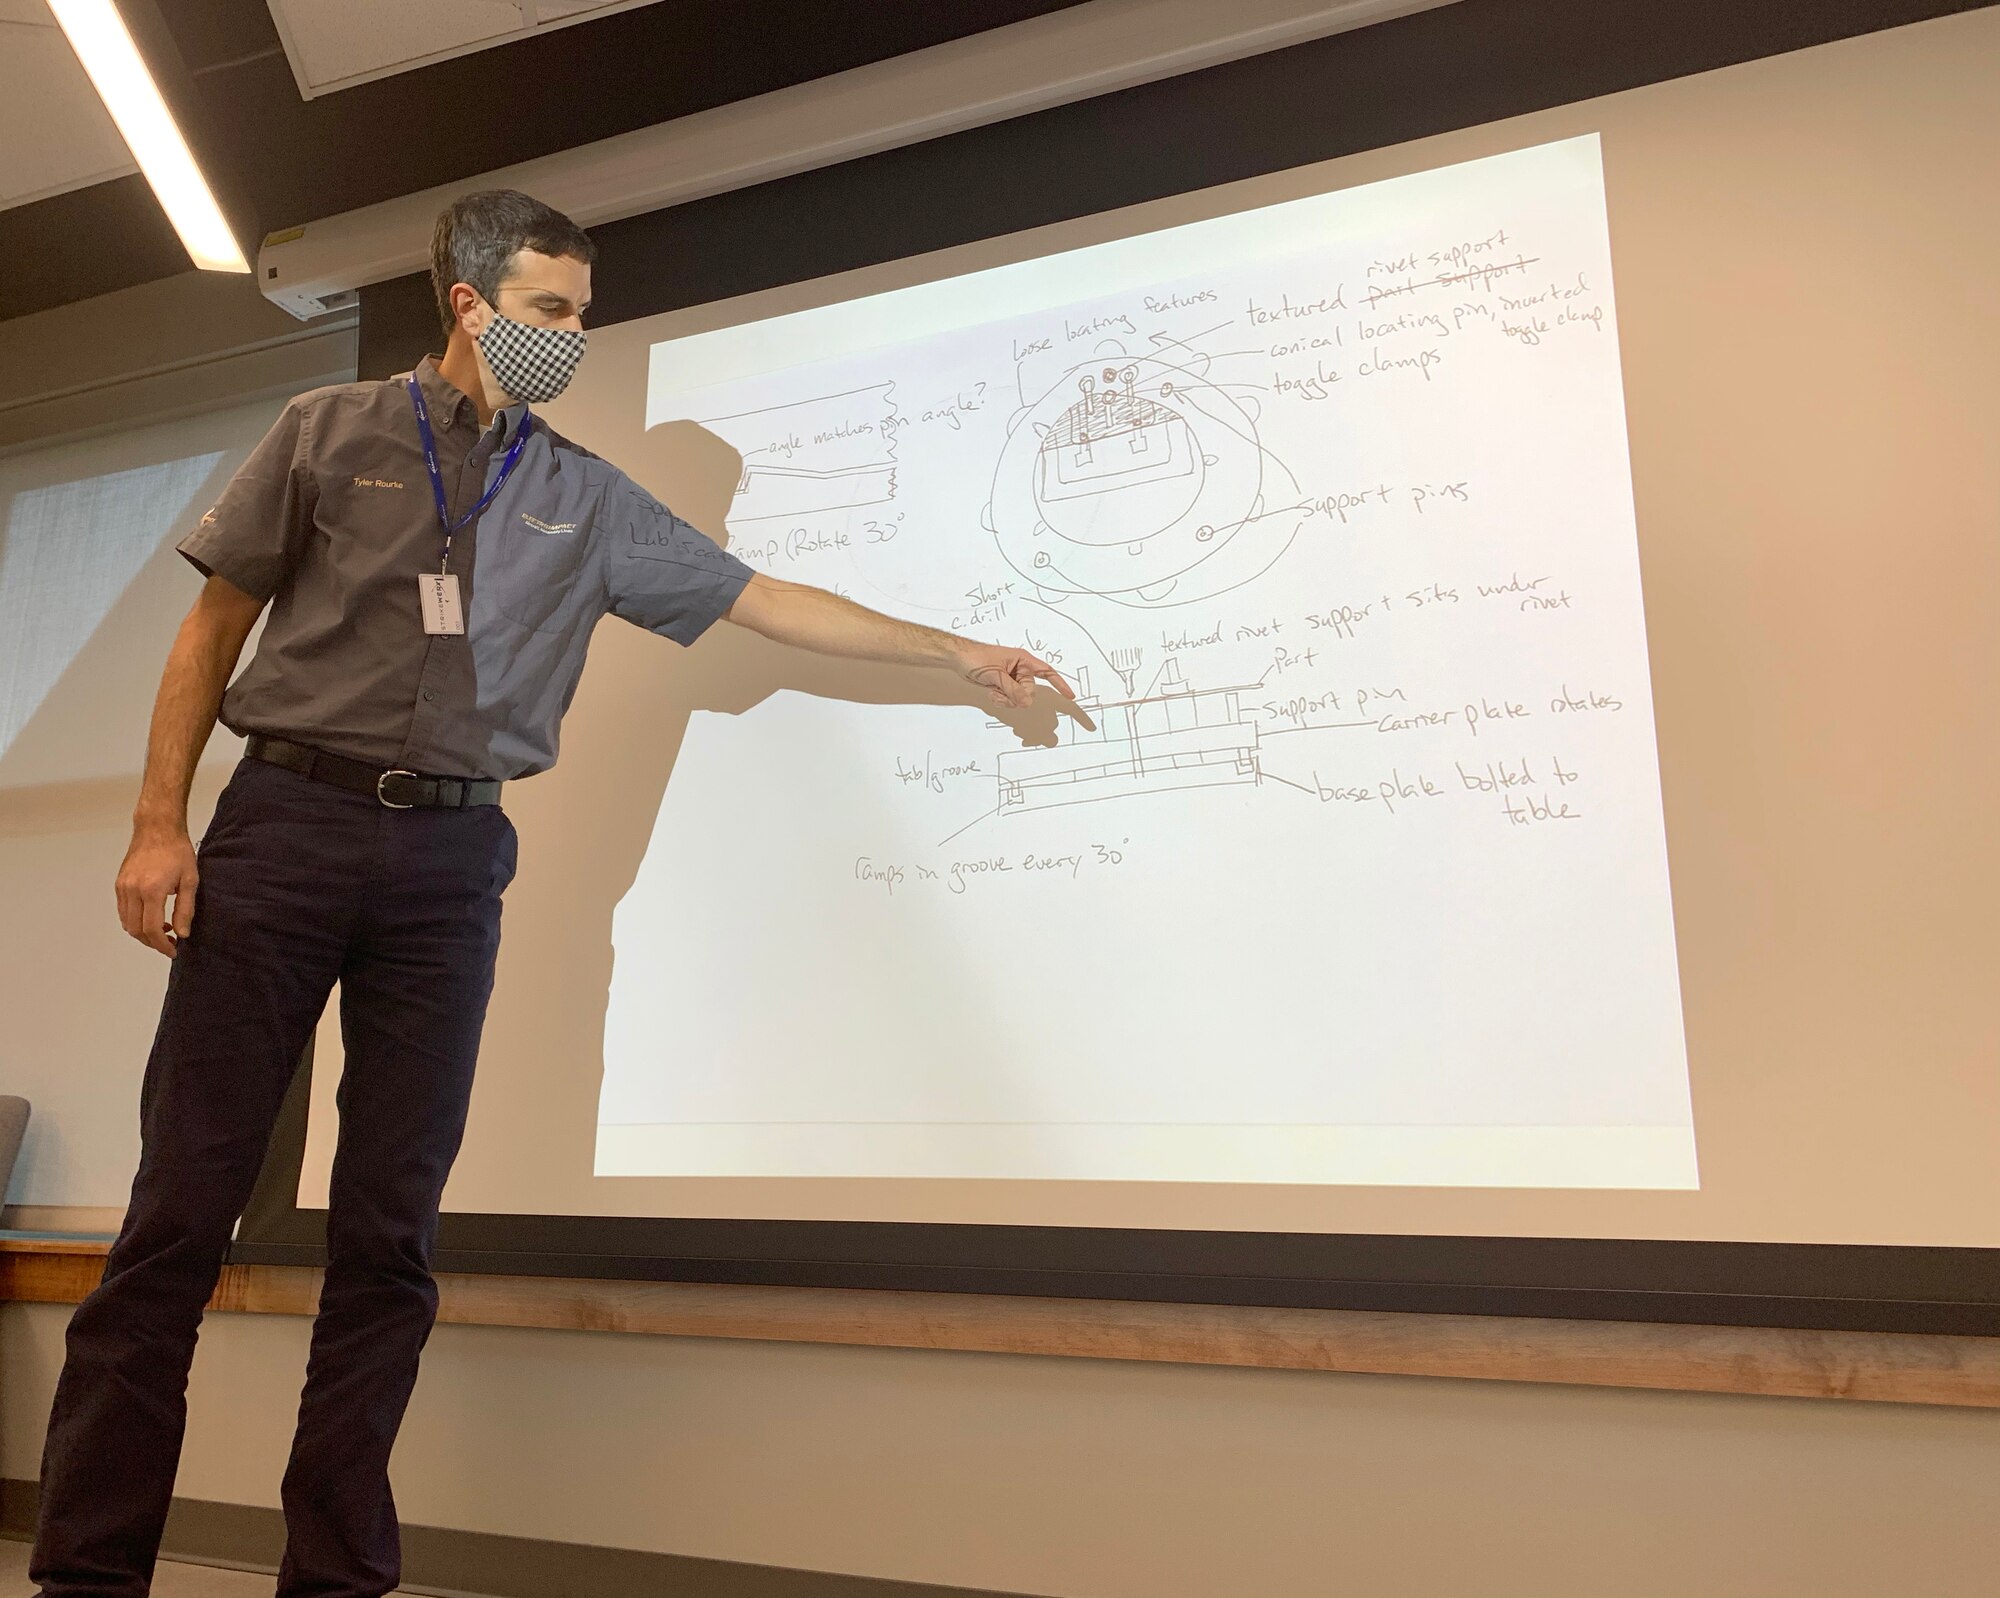 Tyler Rourke with Electroimpact, out of Washington state, showcases a sketch of his prototype to solve drilling B-52 brakes during a Design Sprint held at STRIKEWERX in Bossier City, La., Nov. 16-19, 2020.